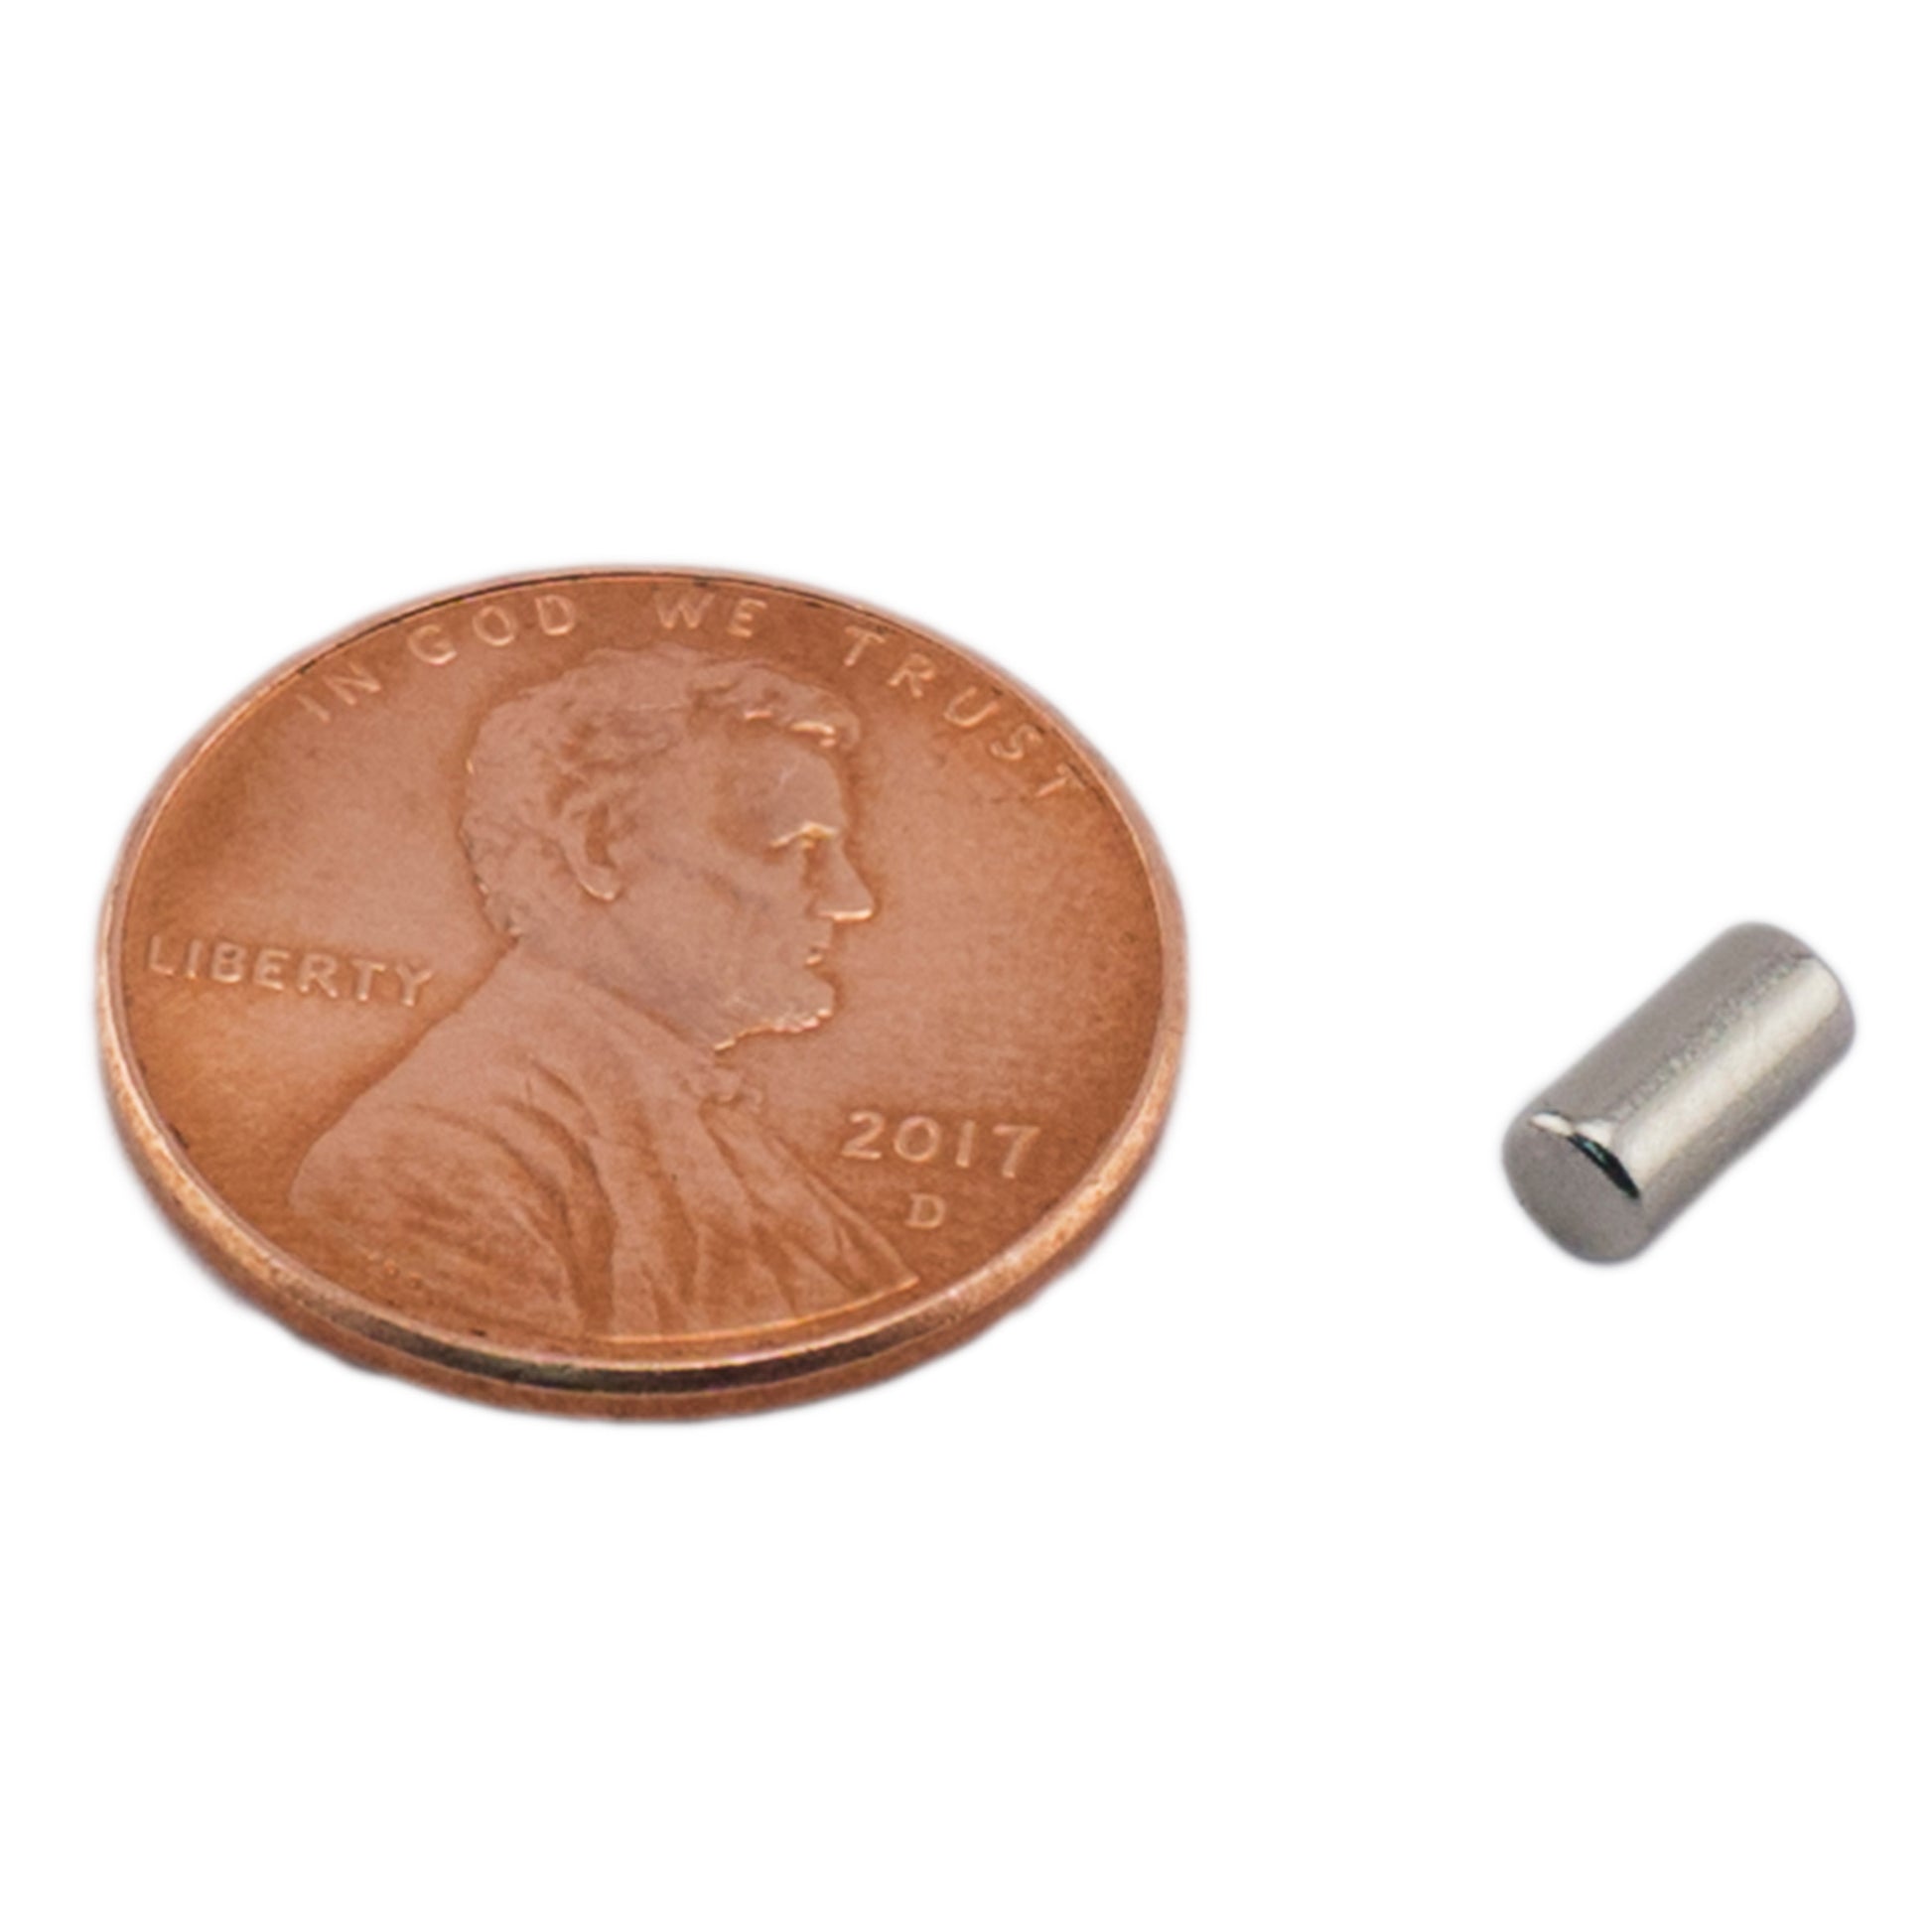 Load image into Gallery viewer, ND001224N Neodymium Disc Magnet - Compared to Penny for Size Reference